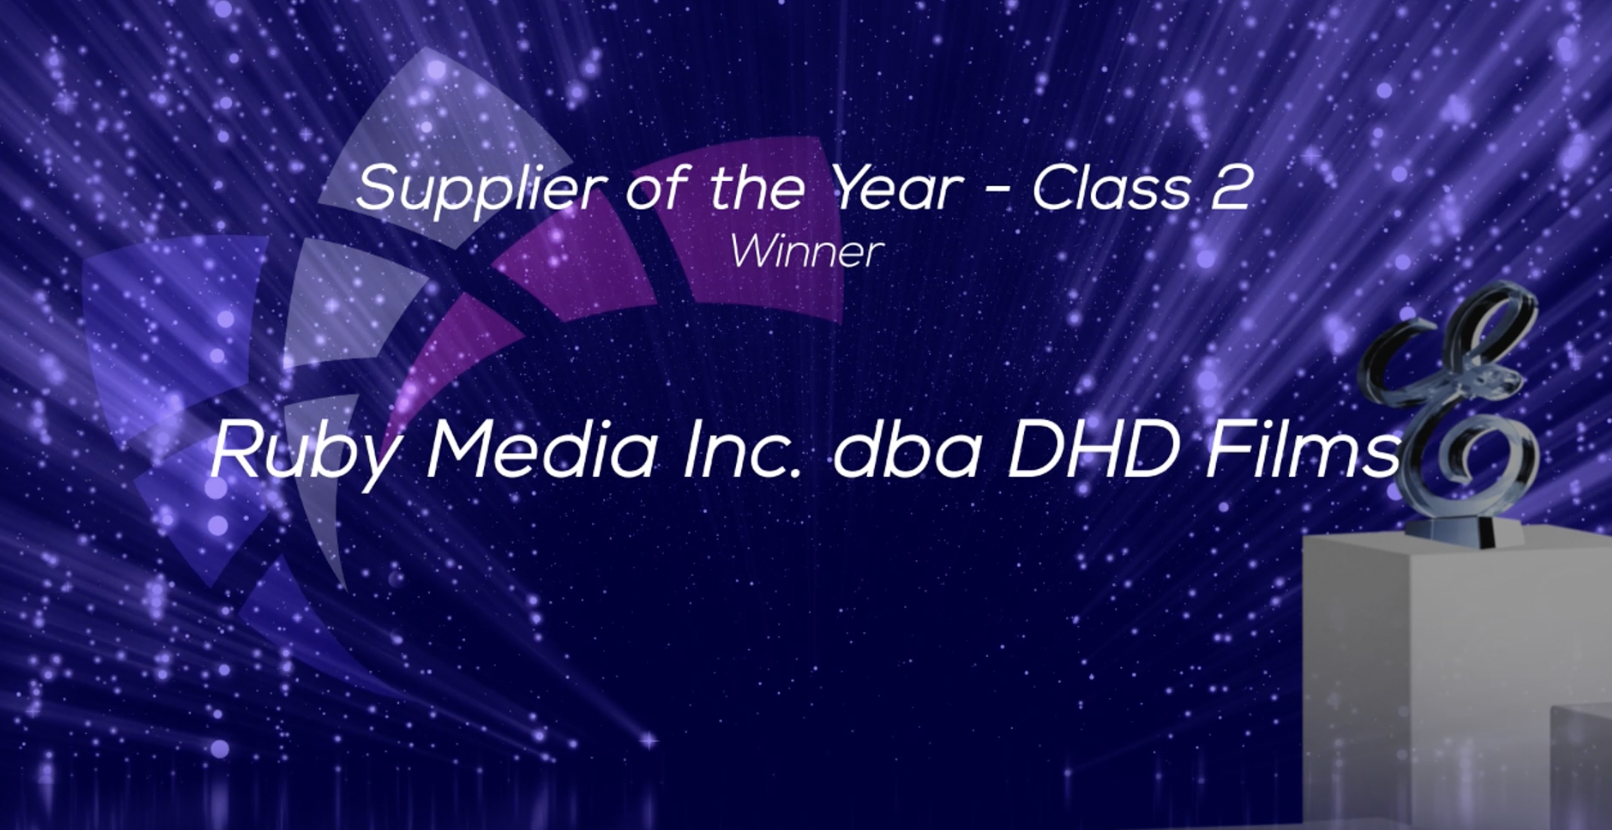 Supplier of the Year Award Goes to DHD Films